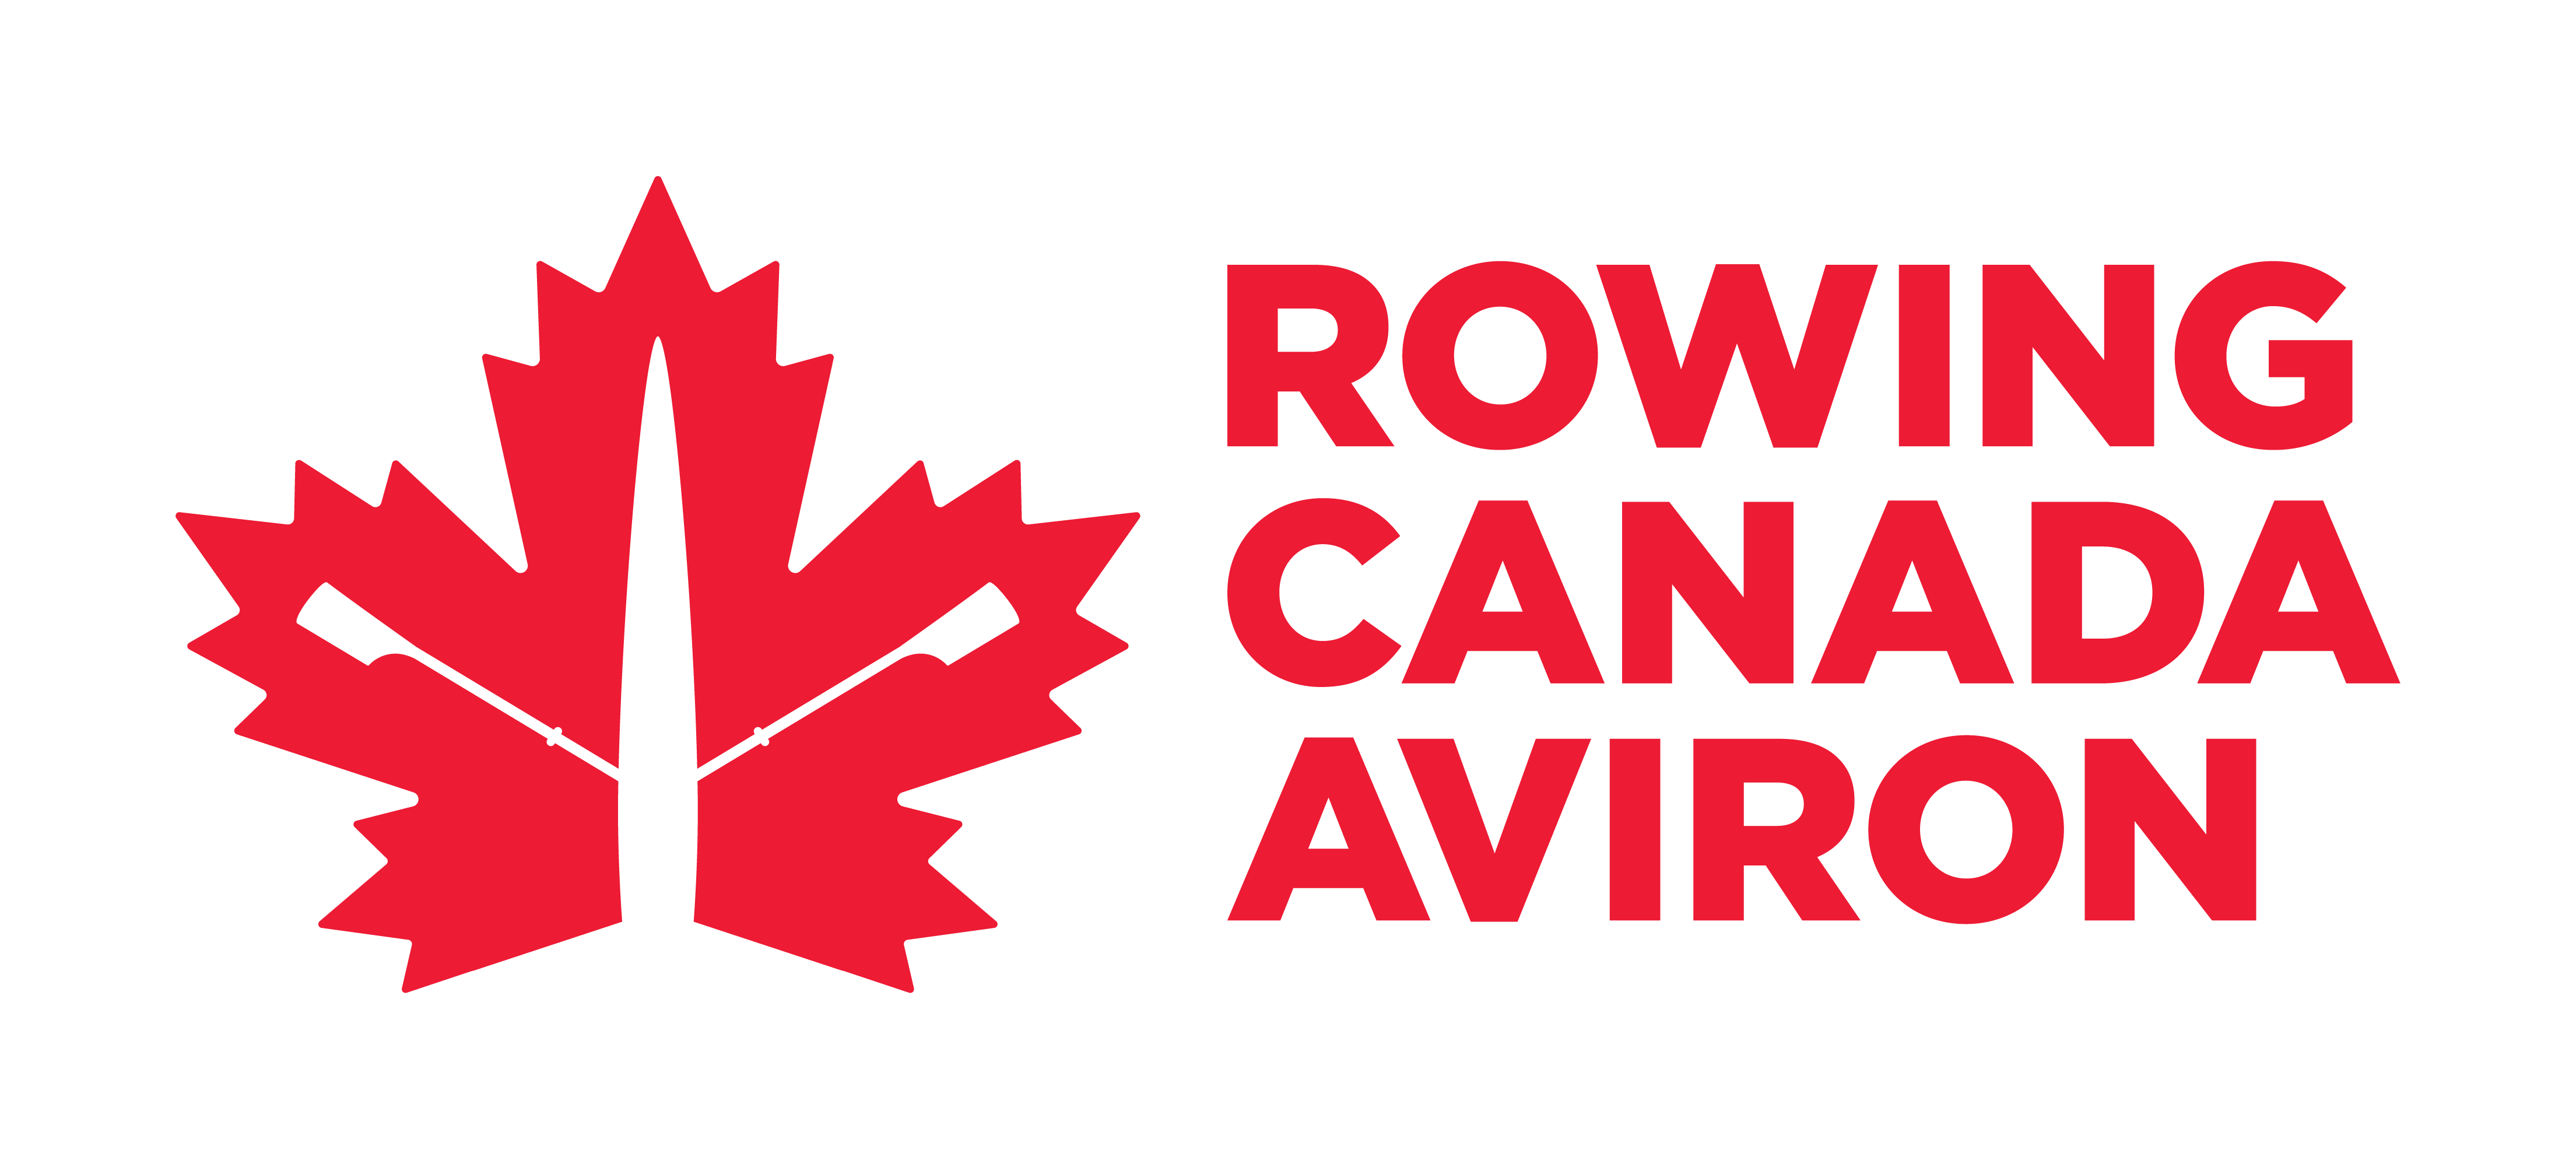 http://ndrowing.ca/wp-content/uploads/2020/09/RCA_logo.png